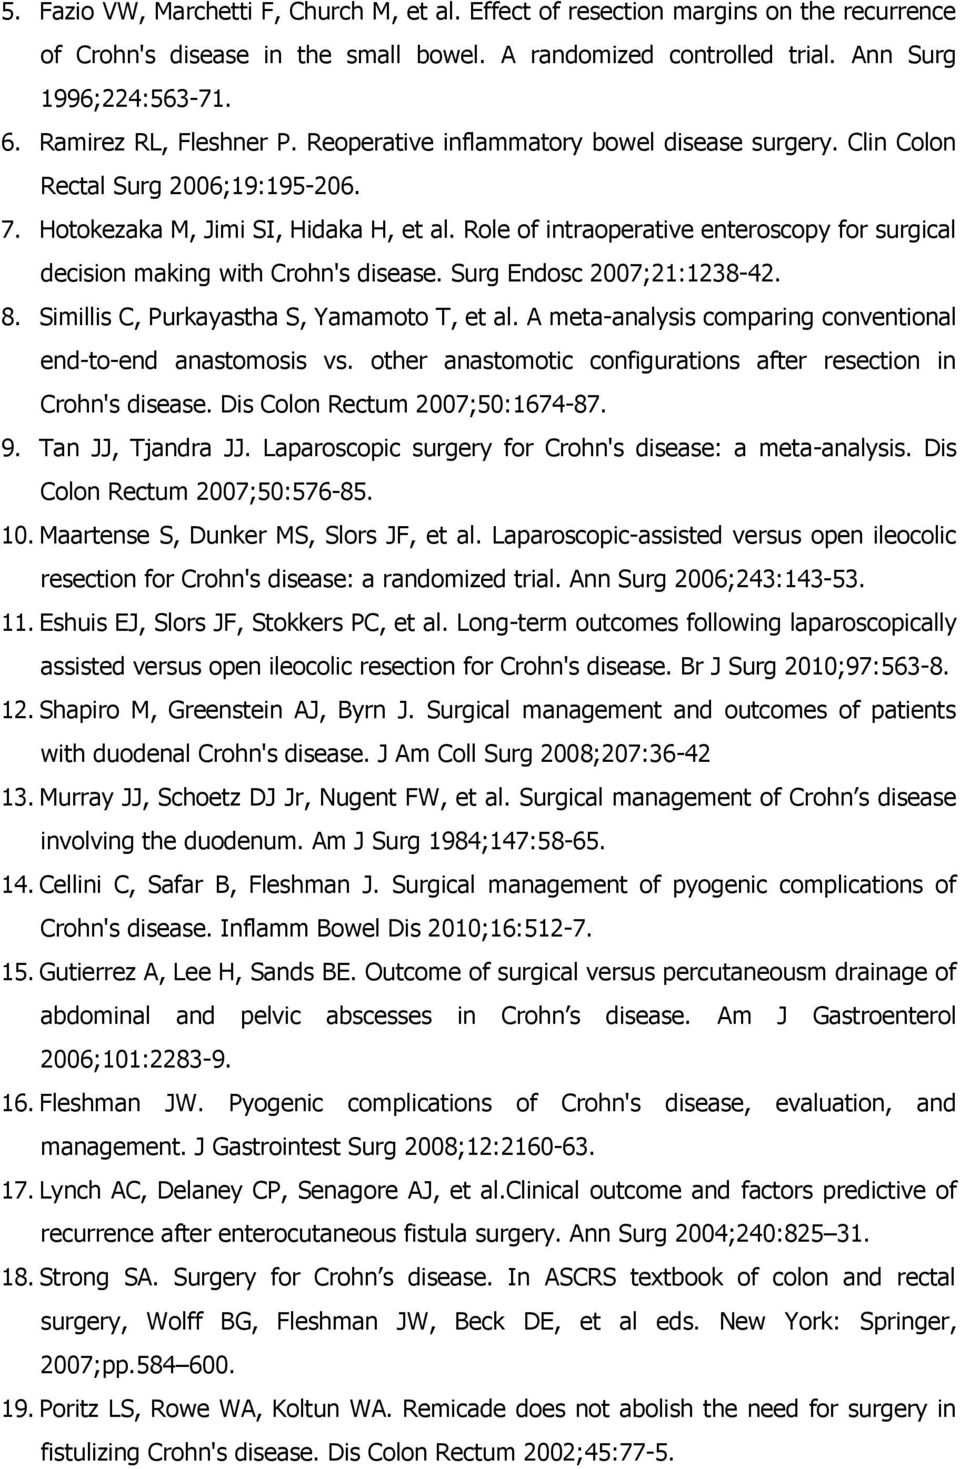 Role of intraoperative enteroscopy for surgical decision making with Crohn's disease. Surg Endosc 2007;21:1238-42. 8. Simillis C, Purkayastha S, Yamamoto T, et al.